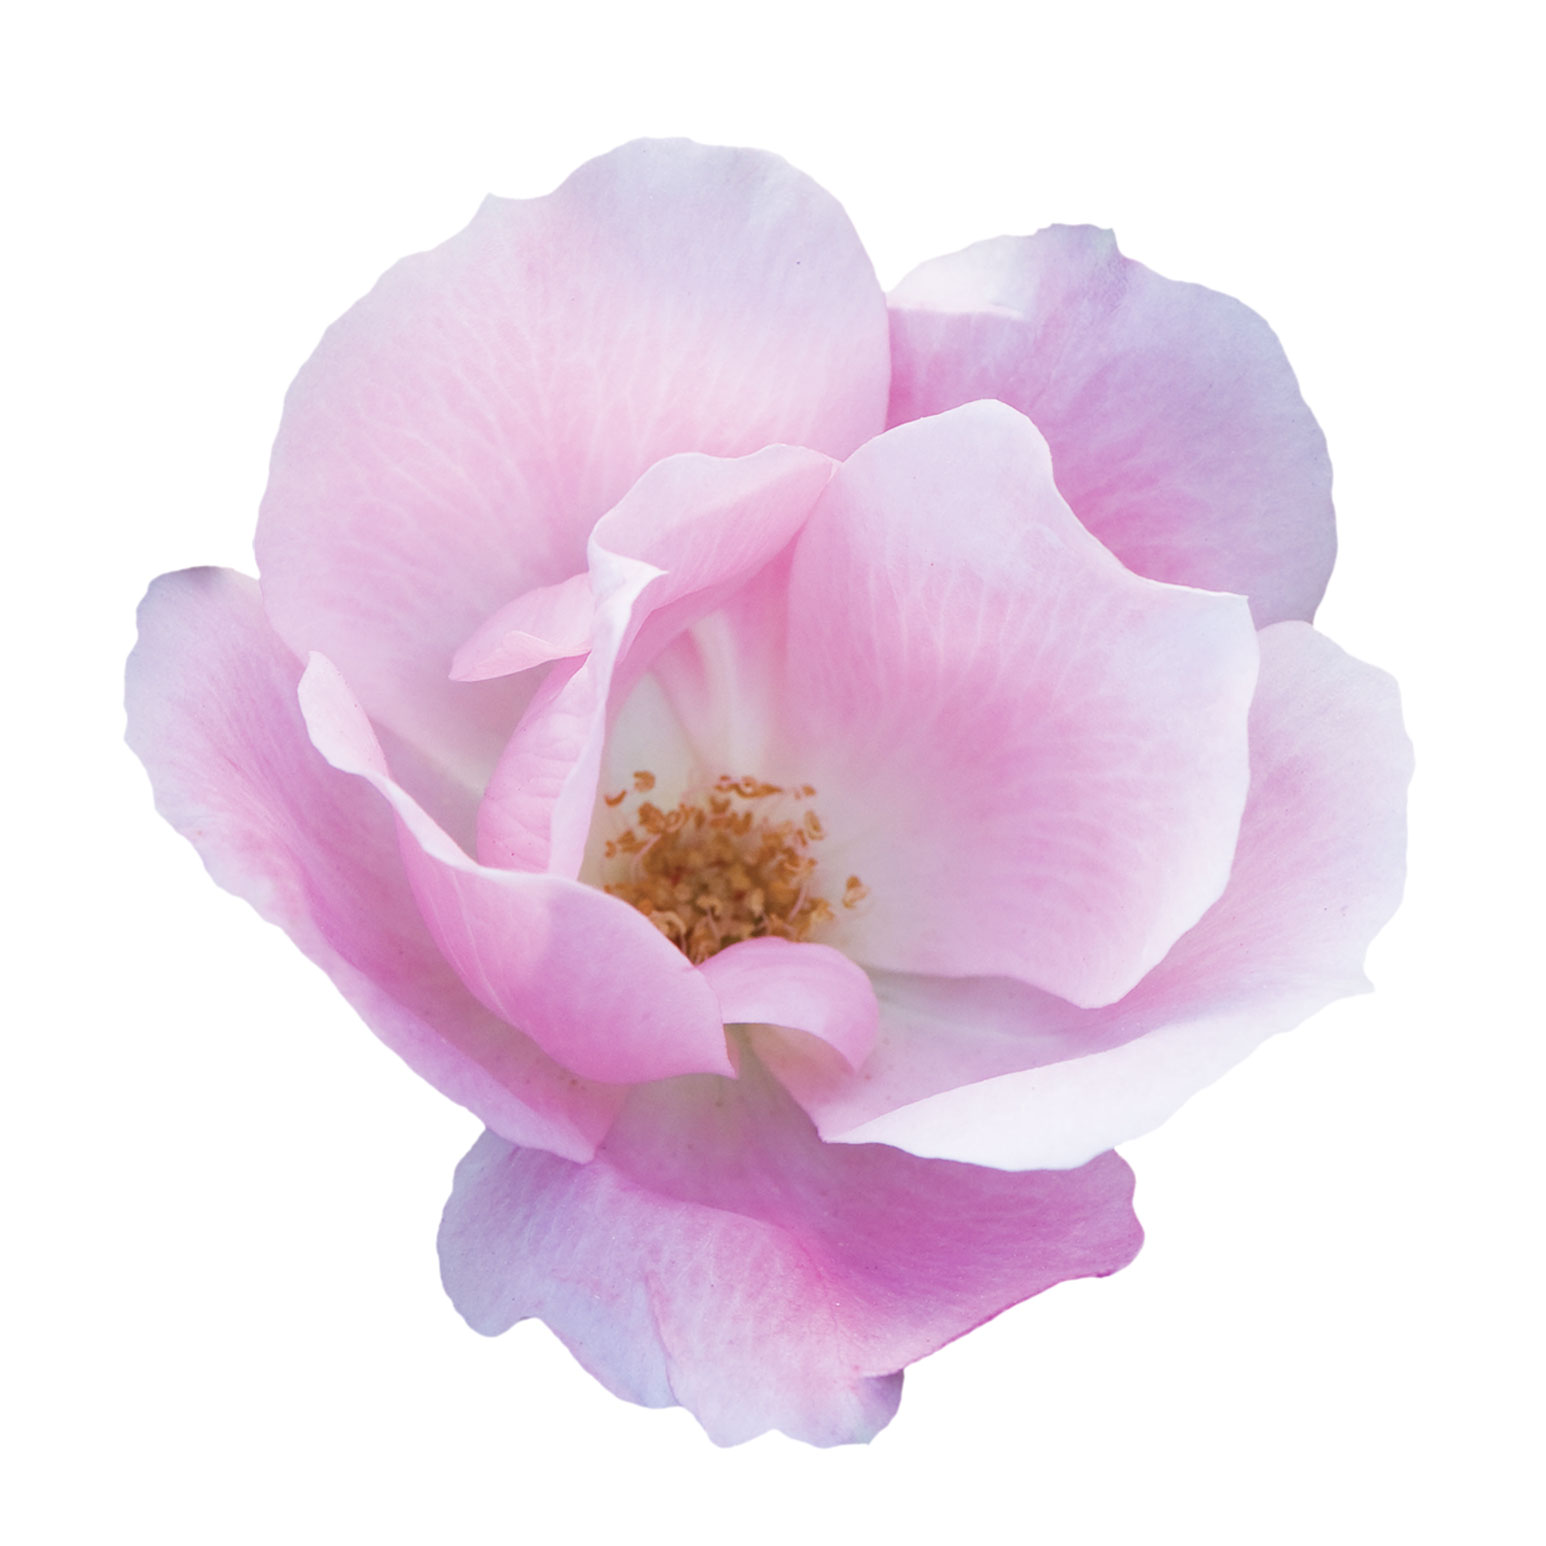 The Blushing Knock Out® Rose